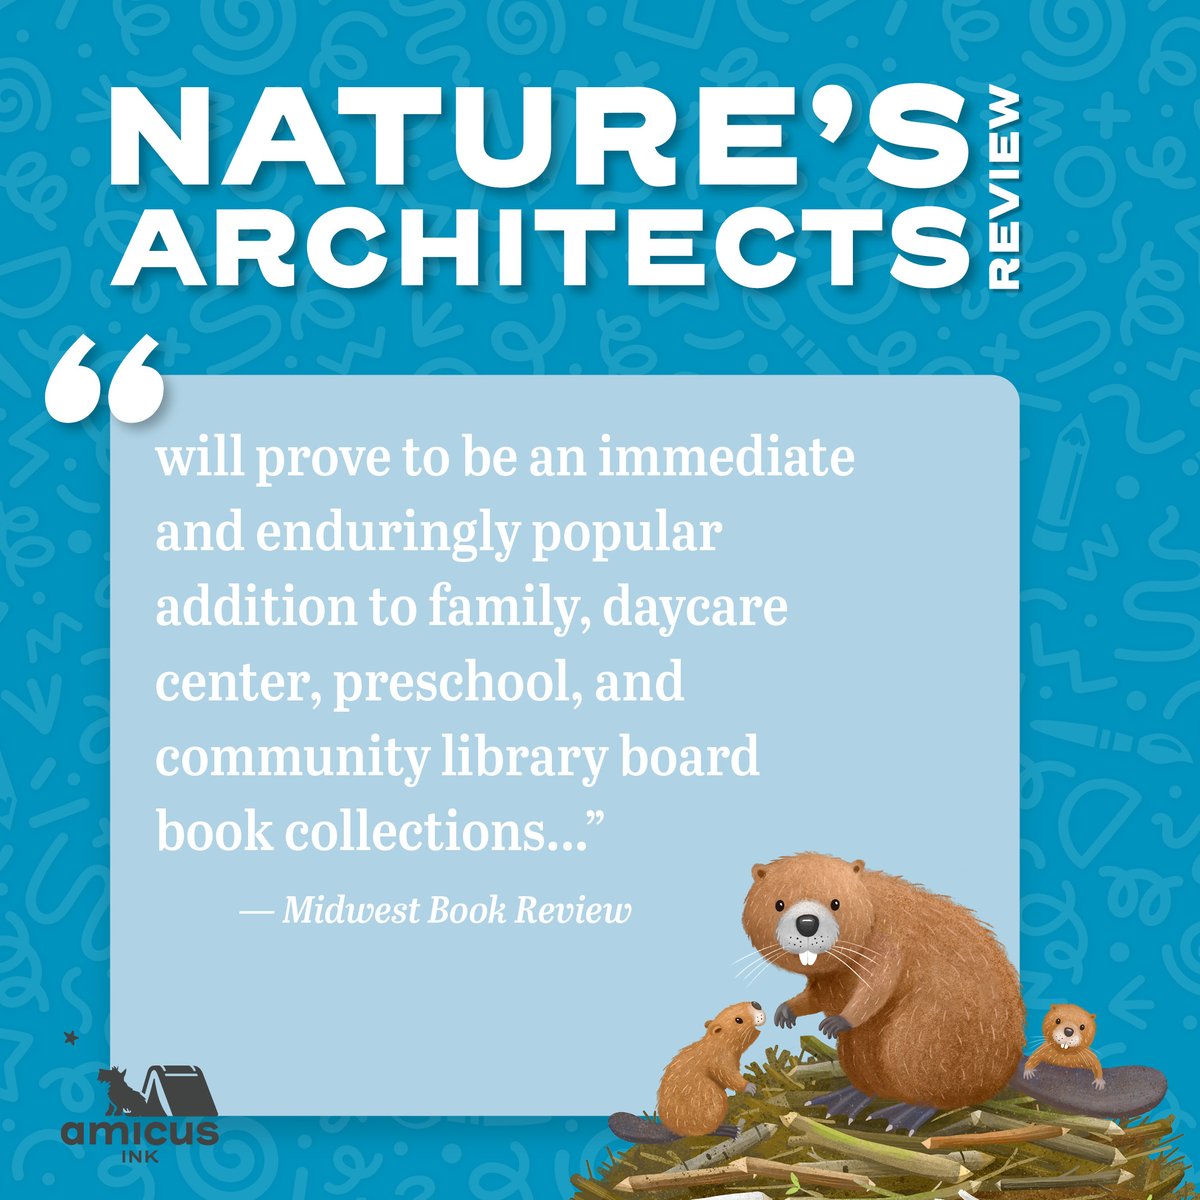 New to the Little Nature Explorers board book family is Nature's Architects!, by @ashayhen and @gavillustrator. amicuspublishing.us/products/natur… #boardbooks #rhyming #childrensbooks #newbooks #nature #review #bookreview